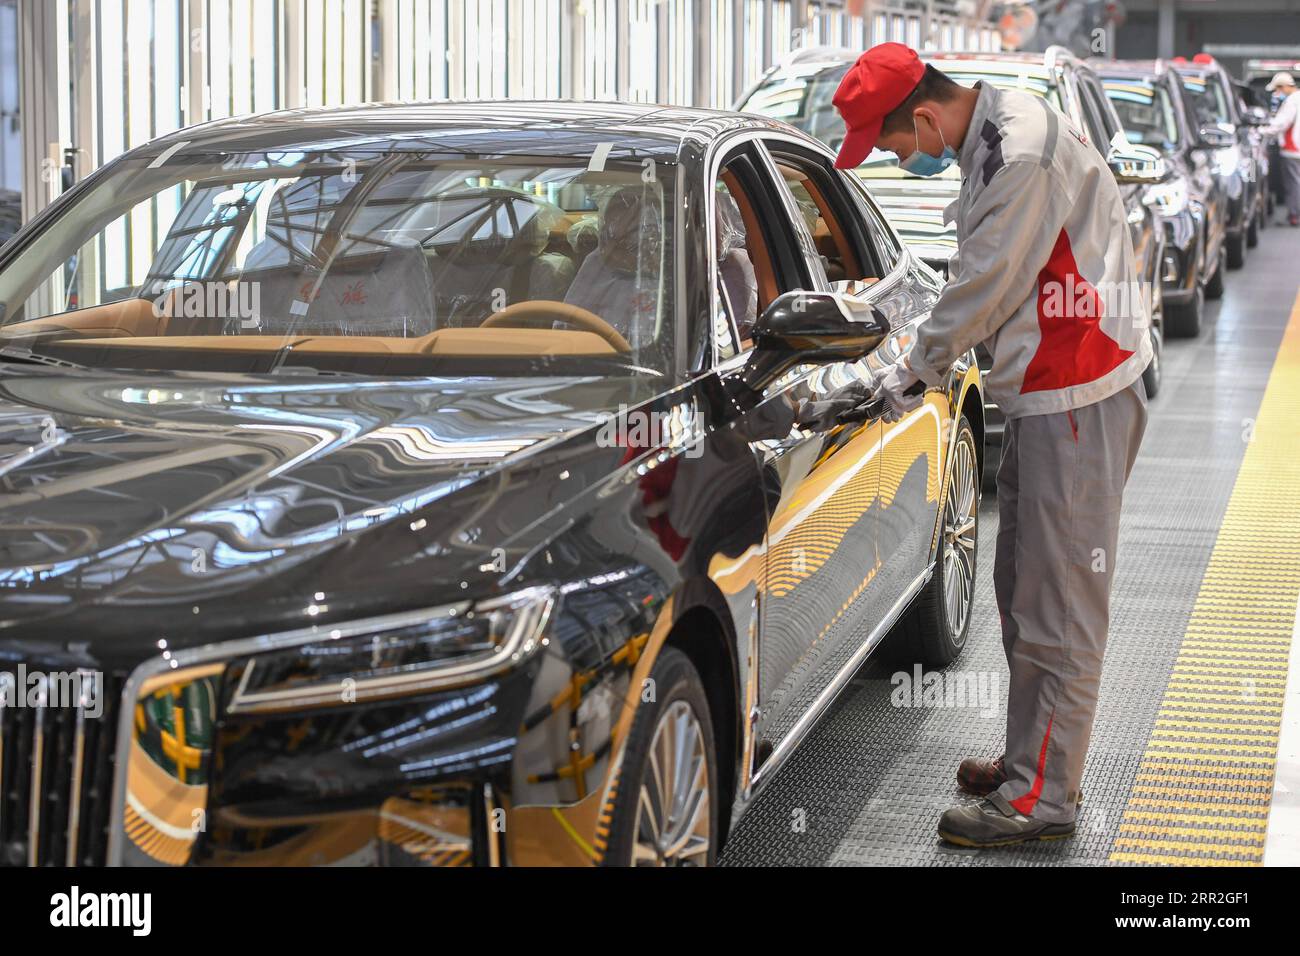 201012 -- CHANGCHUN, Oct. 12, 2020 -- A worker checks a car at a factory of the First Automotive Works FAW Group Co., Ltd. in Changchun, capital of northeast China s Jilin Province, Sept. 23, 2020. China s leading automaker First Automotive Works FAW Group Co., Ltd. sold 2,656,744 vehicles in the first three quarters of the year, up 8 percent year on year, according to corporate sources.  CHINA-CHANGCHUN-FAW-SALES-GROWTH CN ZhangxNan PUBLICATIONxNOTxINxCHN Stock Photo